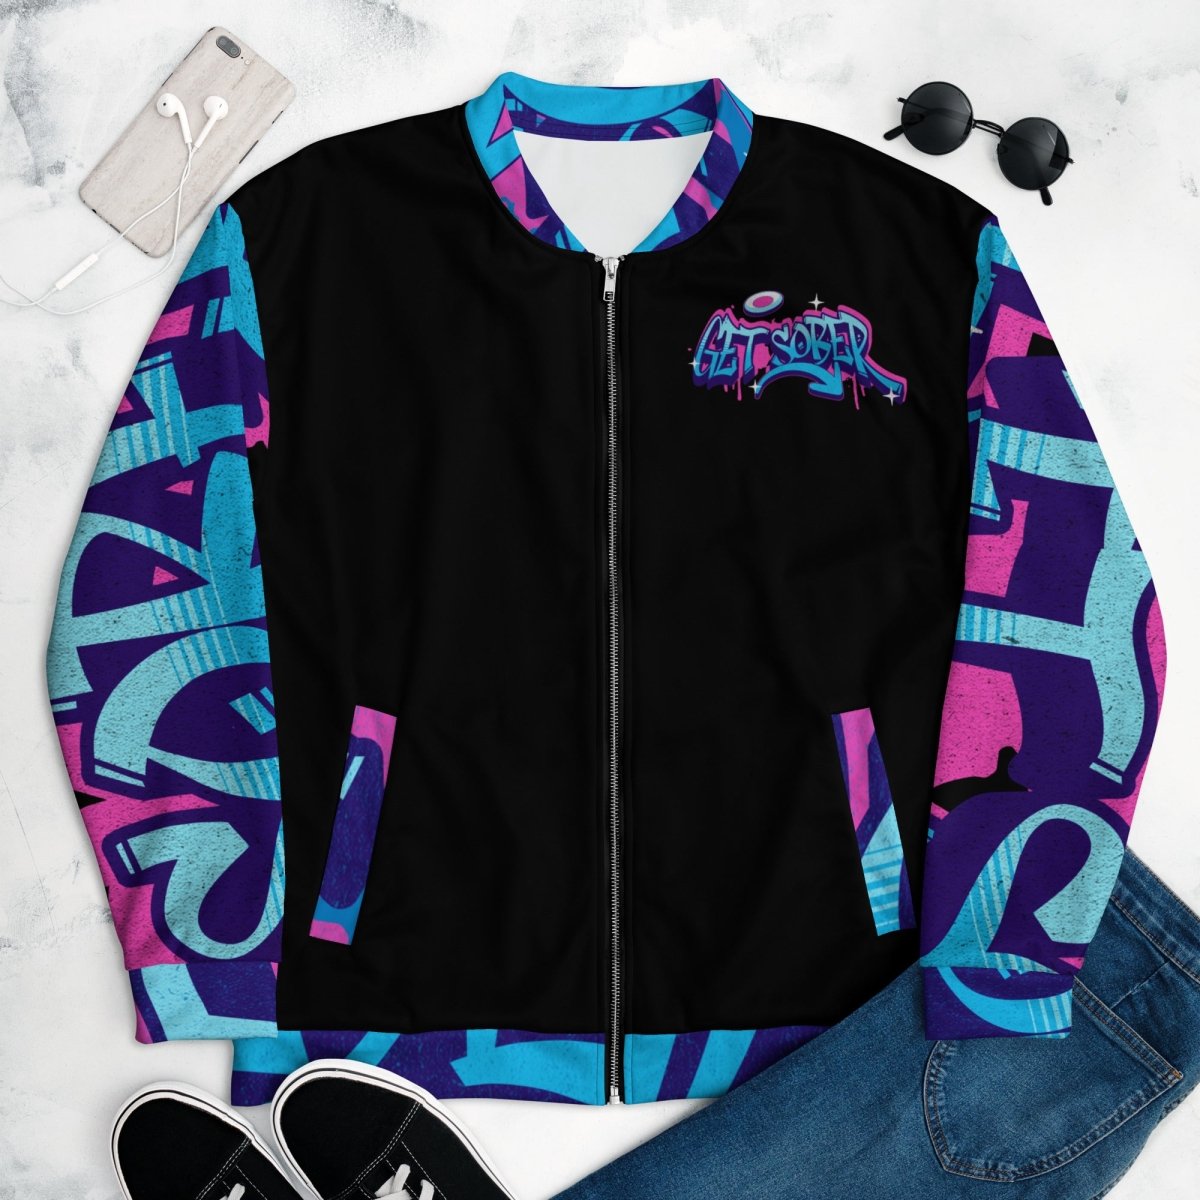 "Get Sober" Graffiti-Style Bomber Jacket: Embracing Recovery with Edgy Style - | Sobervation